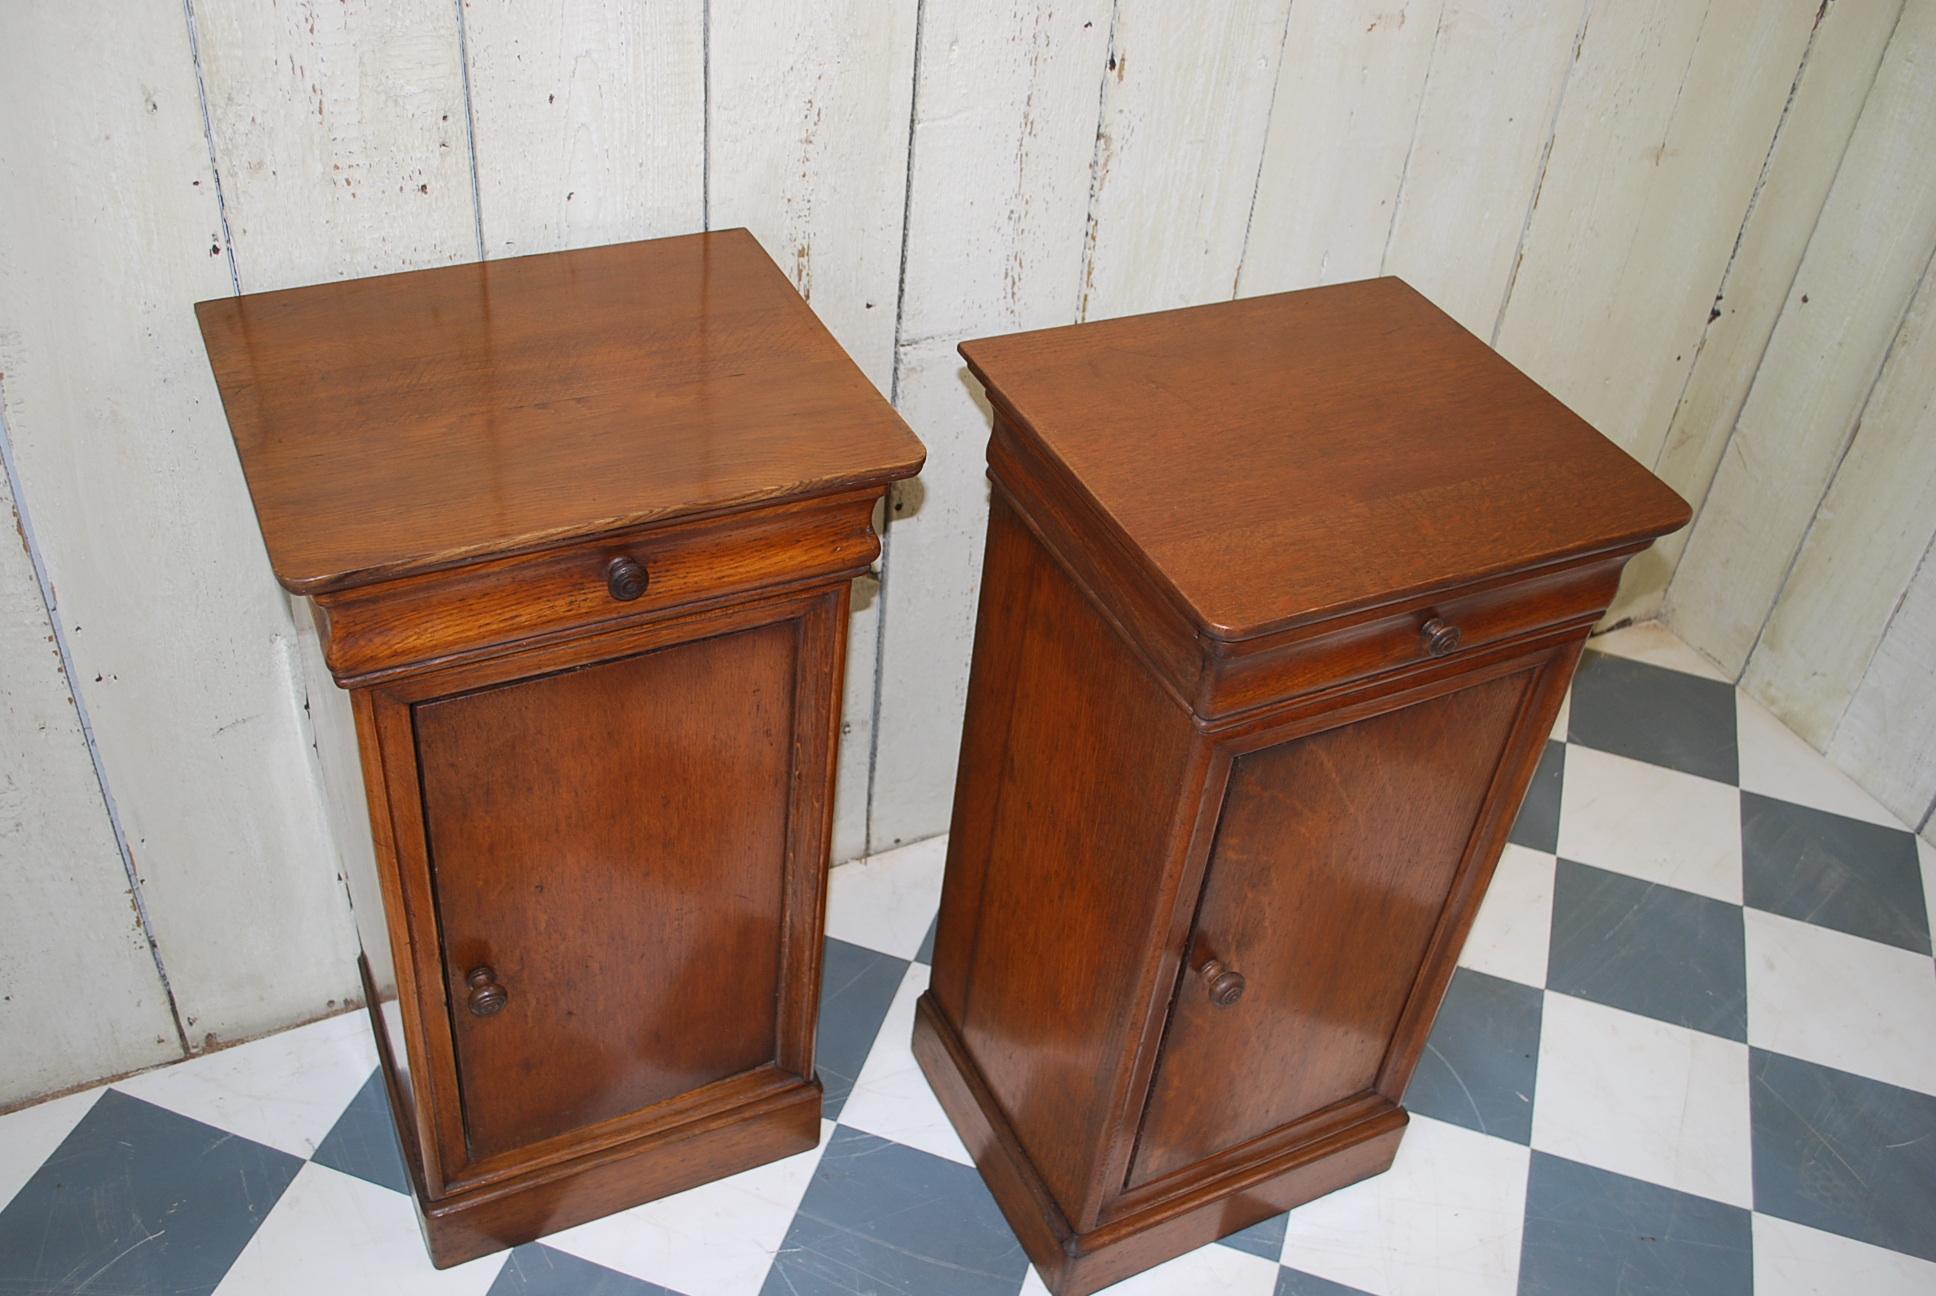 A lovely pair of Louis Philippe bedside cabinets / lockers in solid oak with drawer above a cupboard base. Good color and patination, ideal in a modern or period property.

Measurements
Height 78 cm - 30.71 in

Width 41 cm - 16.14 in

Depth